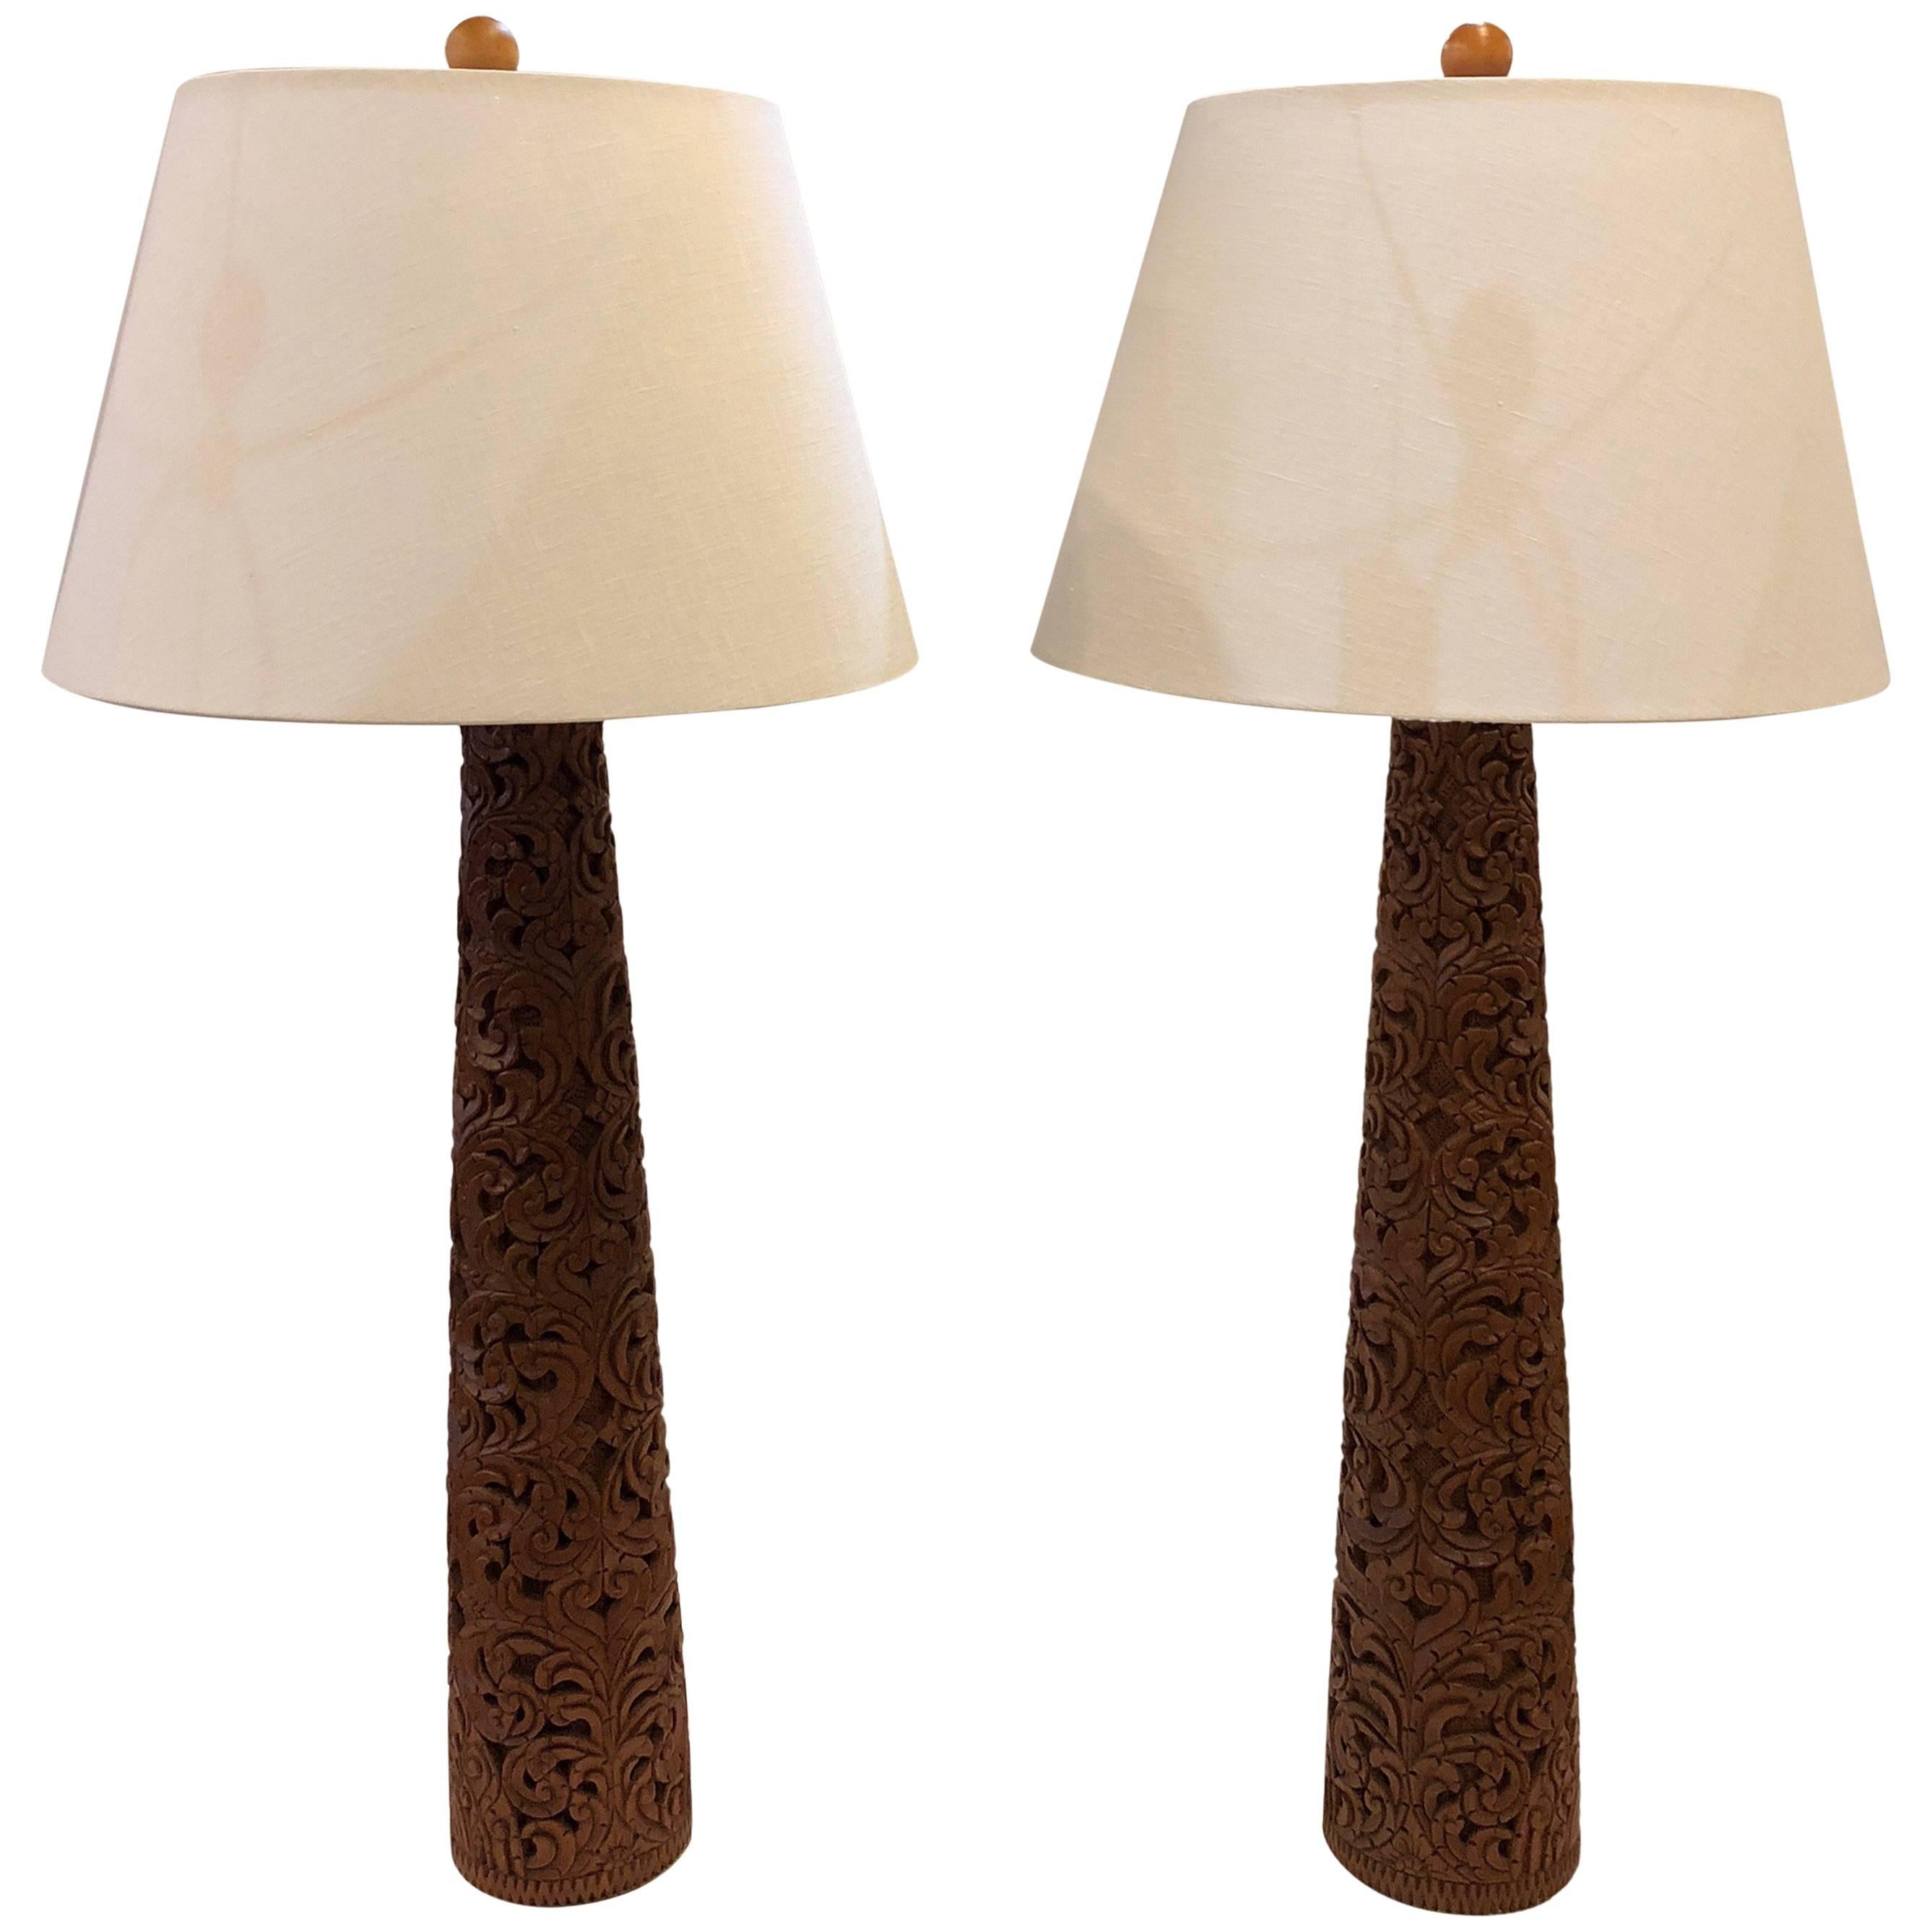 Pair of Hand-Carved Midcentury Teak Lamps California Cool For Sale